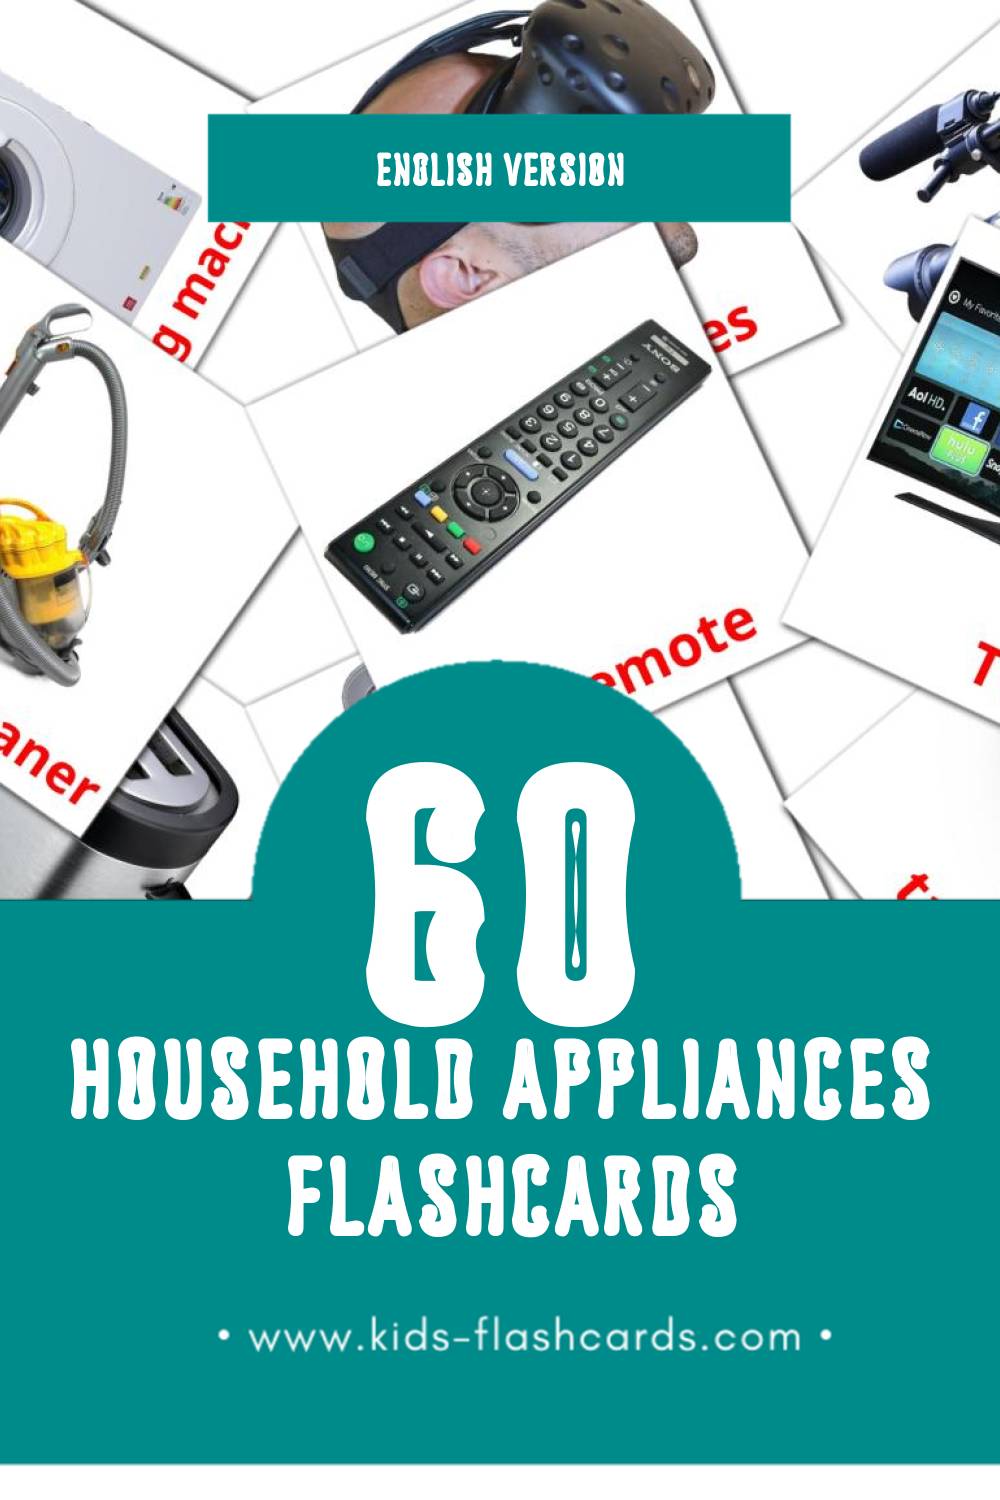 Visual Household Appliances Flashcards for Toddlers (61 cards in English)